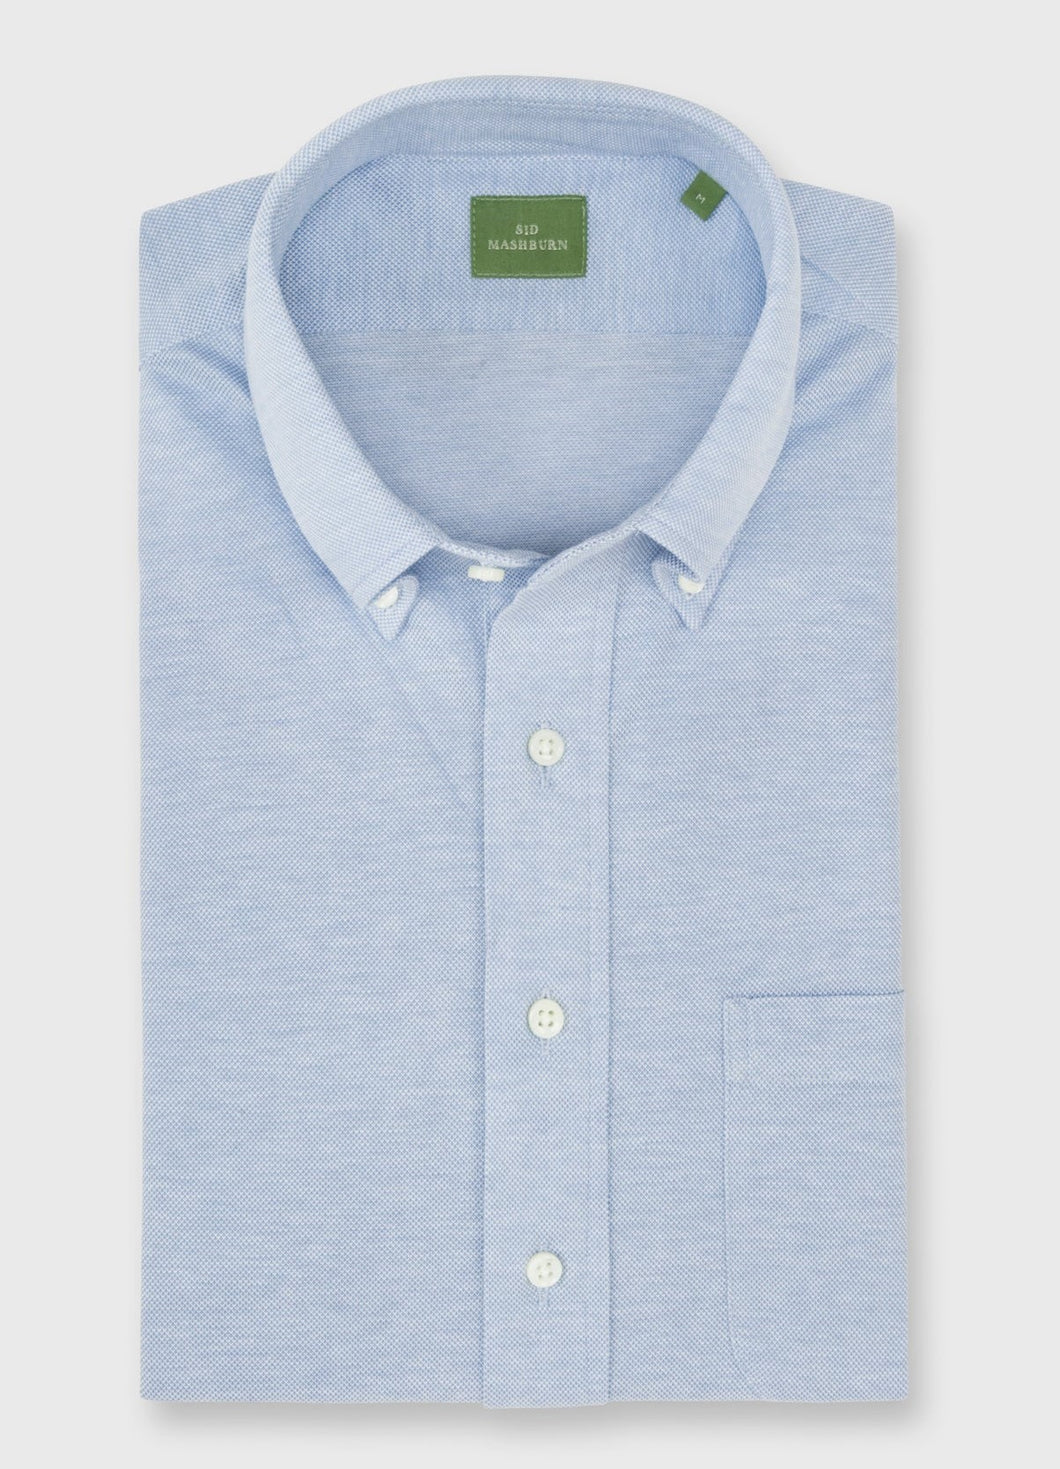 Sid Mashburn Knit Button-Down Popover Shirt in Sky Blue Oxford Pique